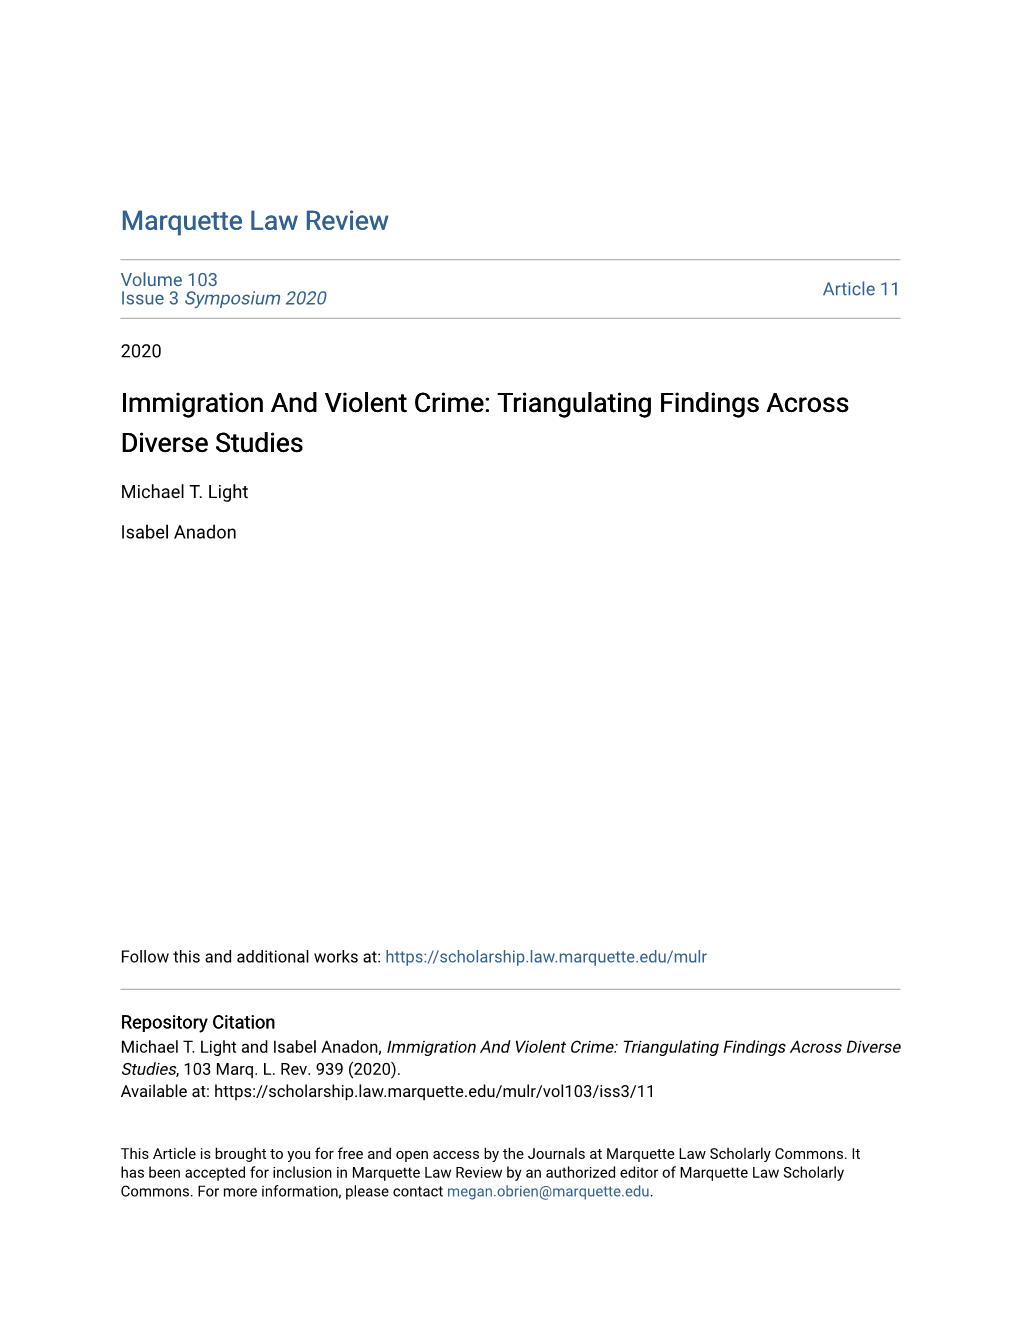 Immigration and Violent Crime: Triangulating Findings Across Diverse Studies